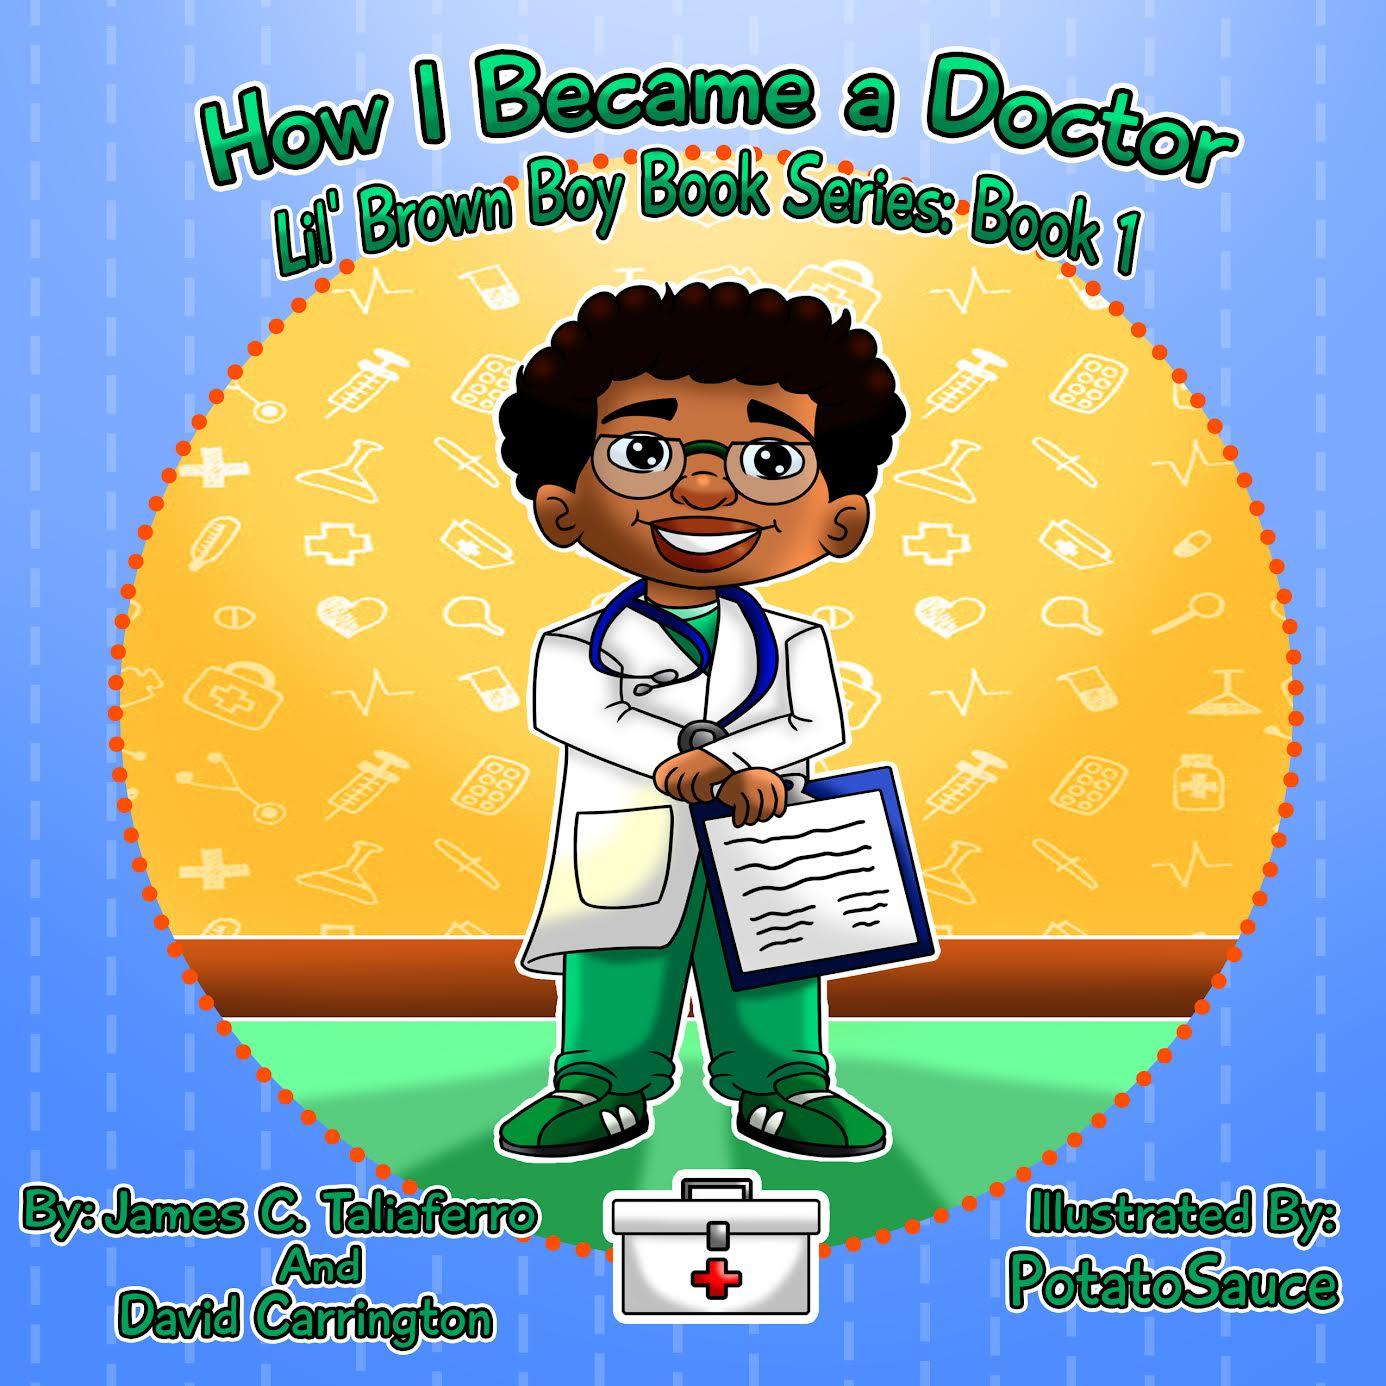 How I became a doctor book cover